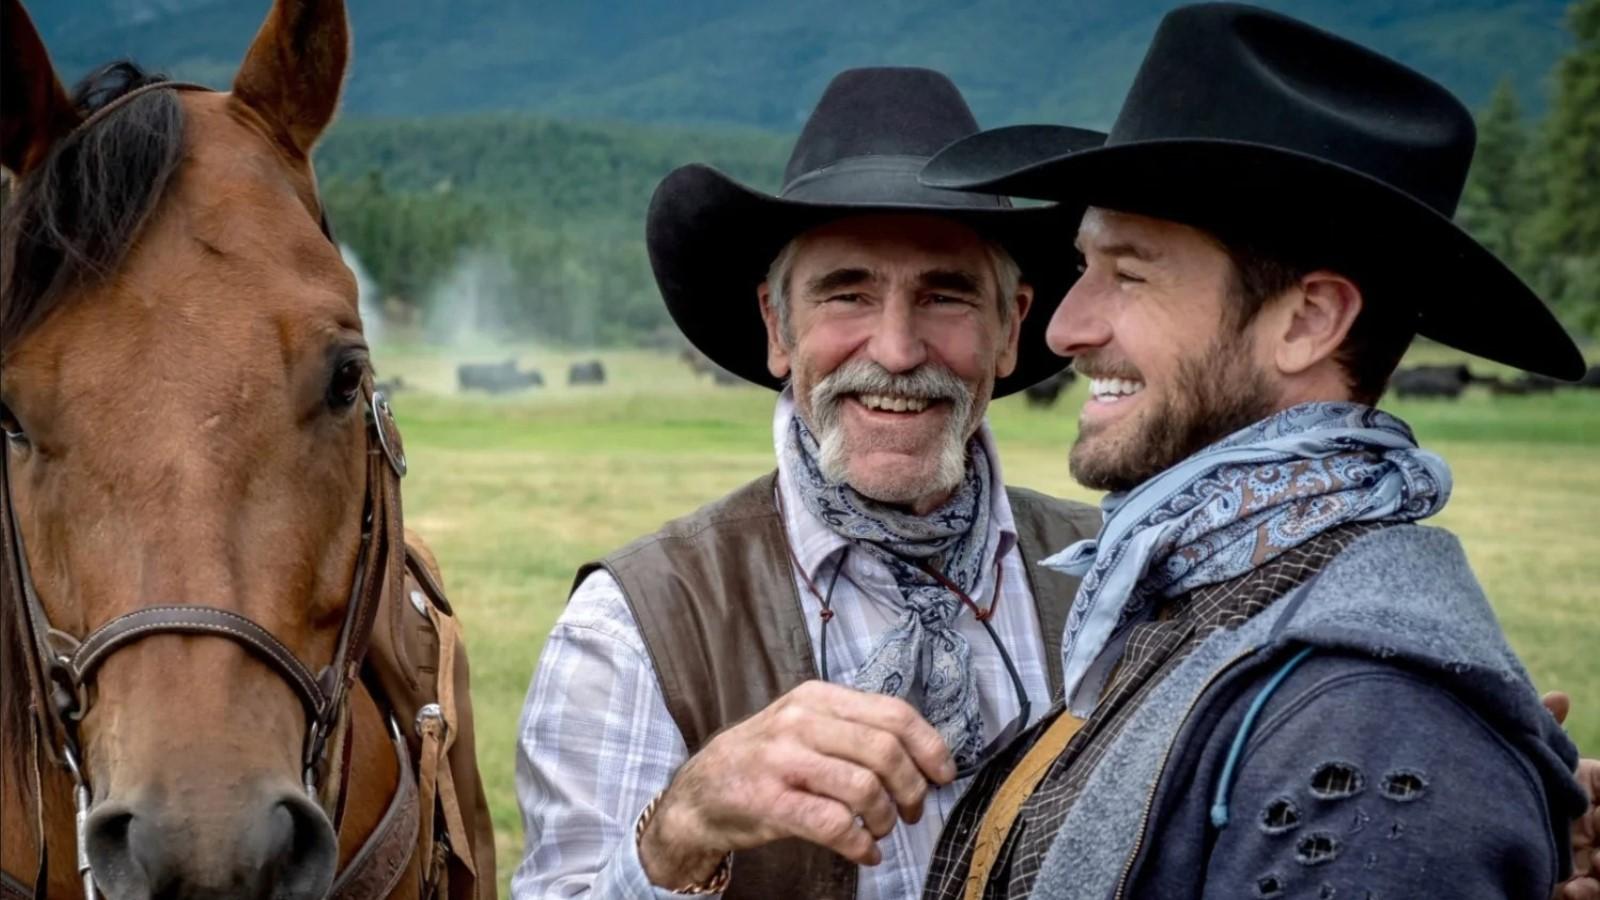 Lloyd and Ryan in Yellowstone, laughing while standing next to a horse